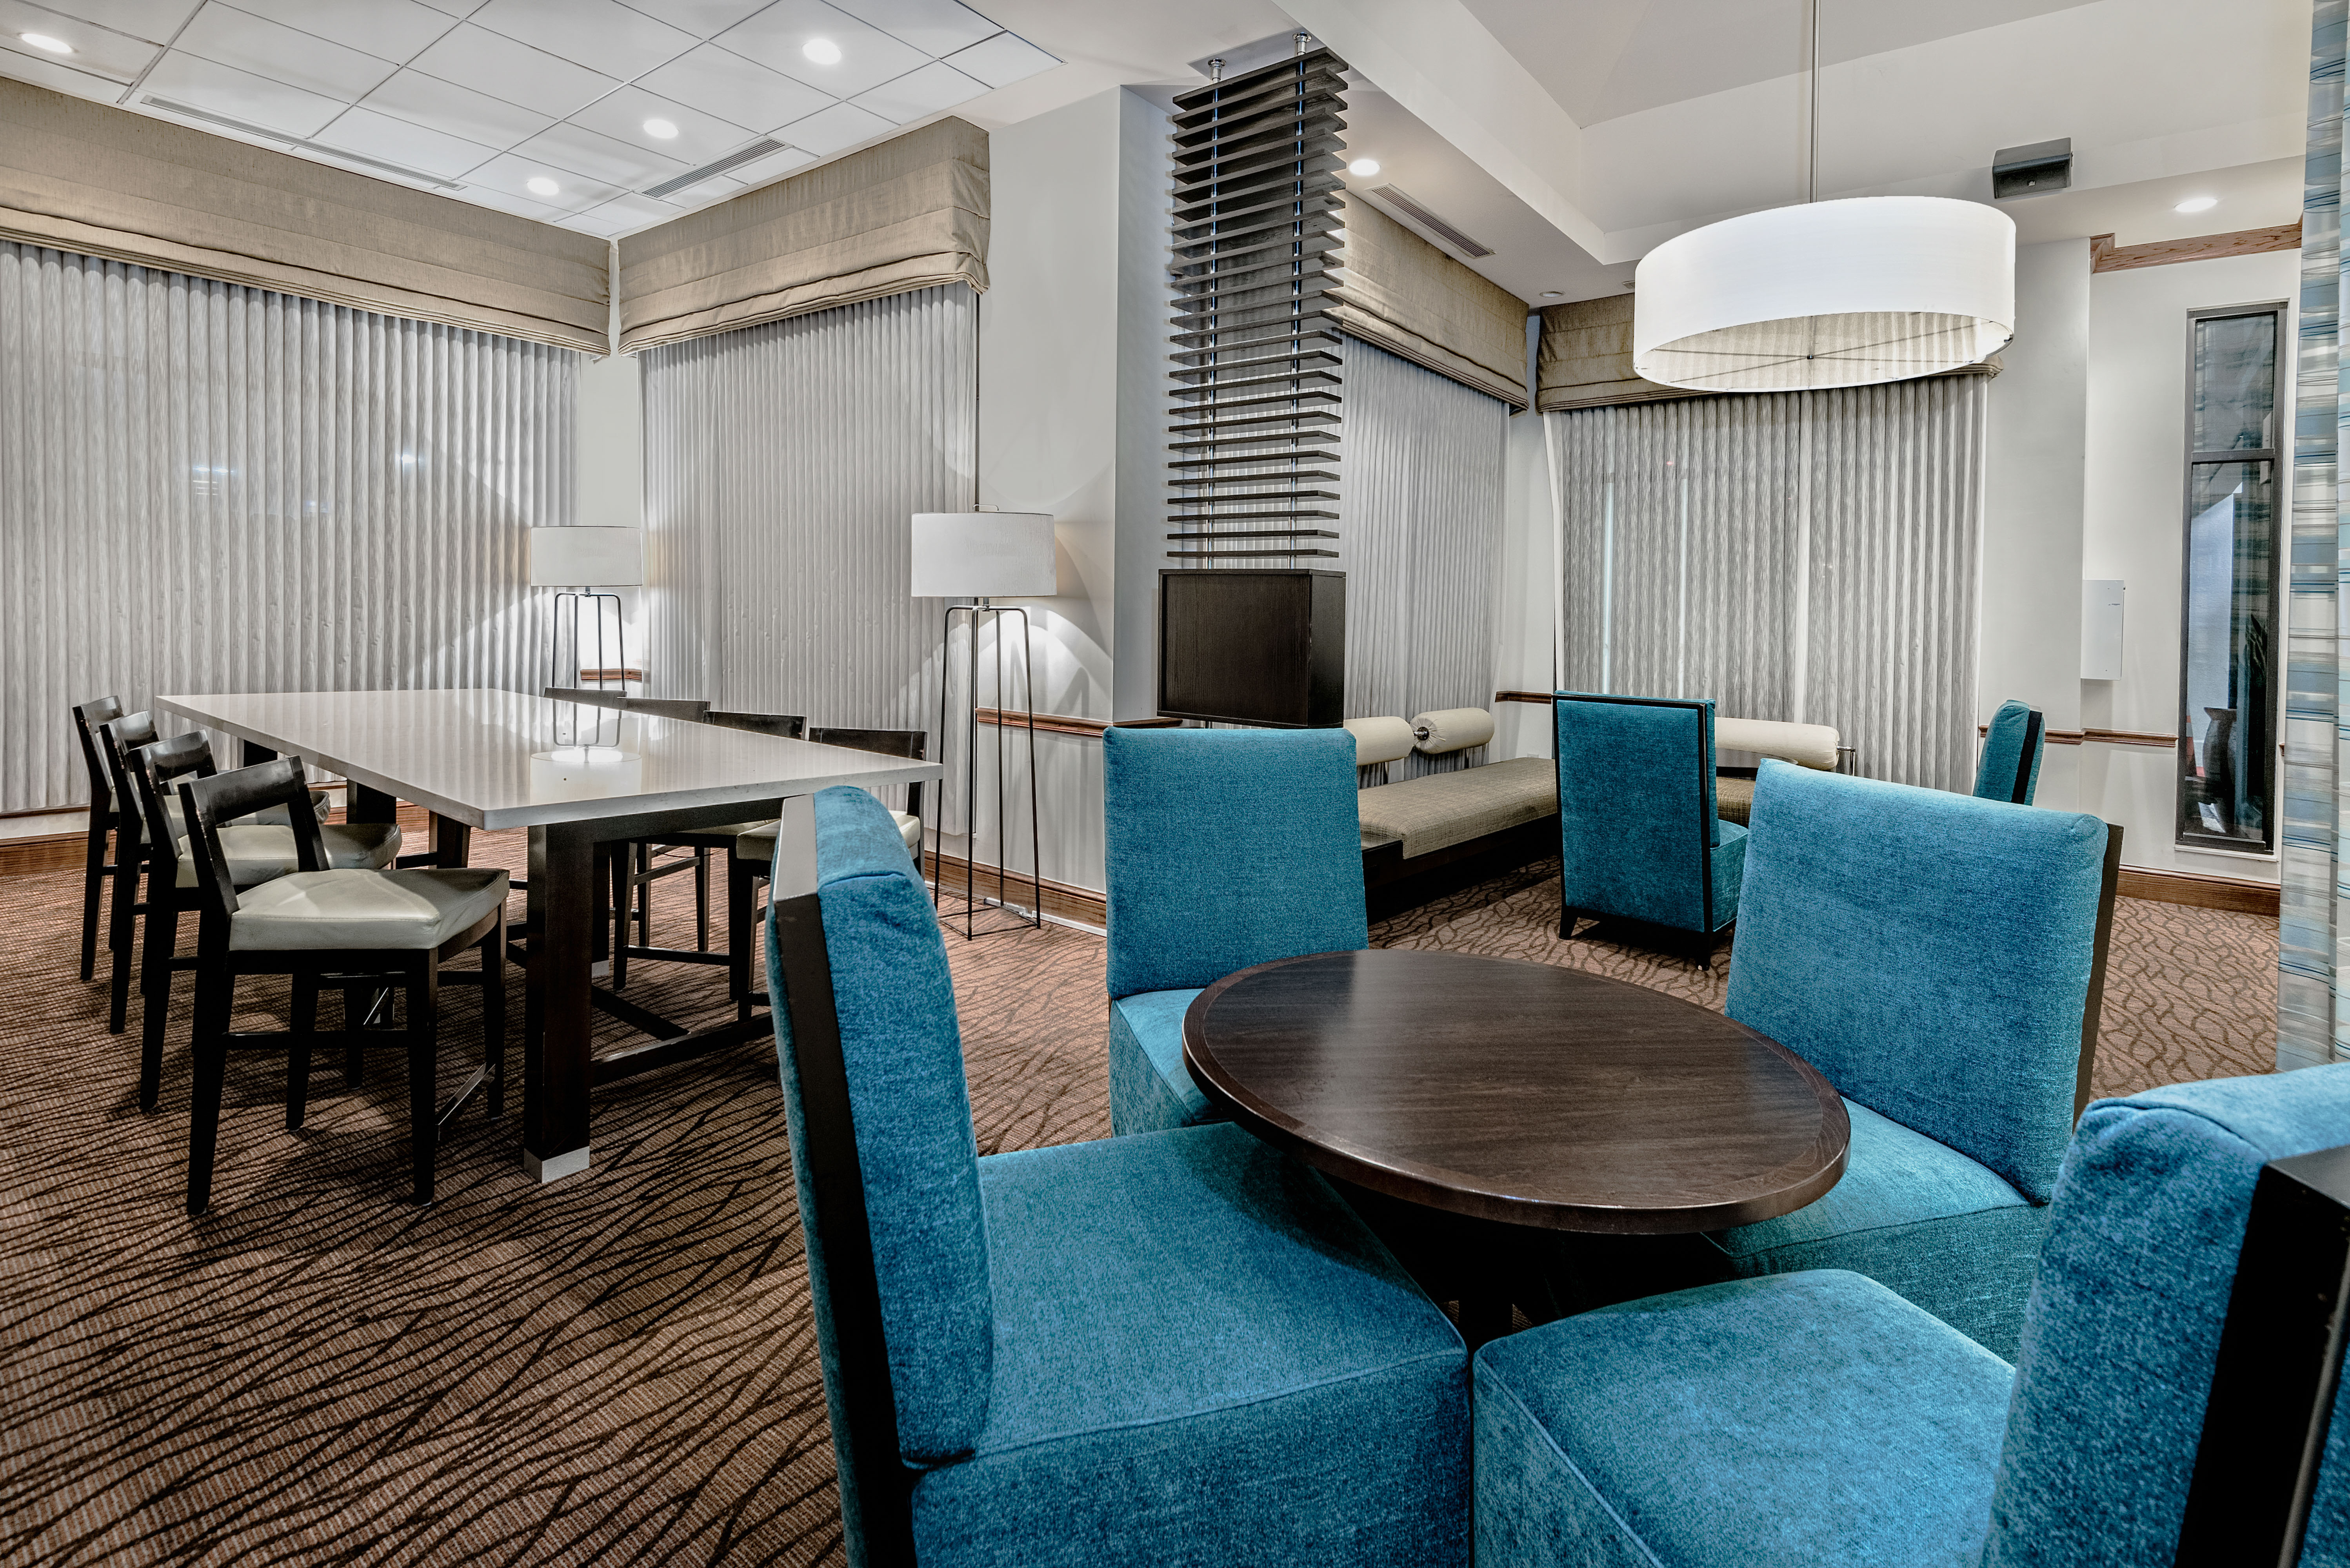 Lobby Dining and Seating Areas